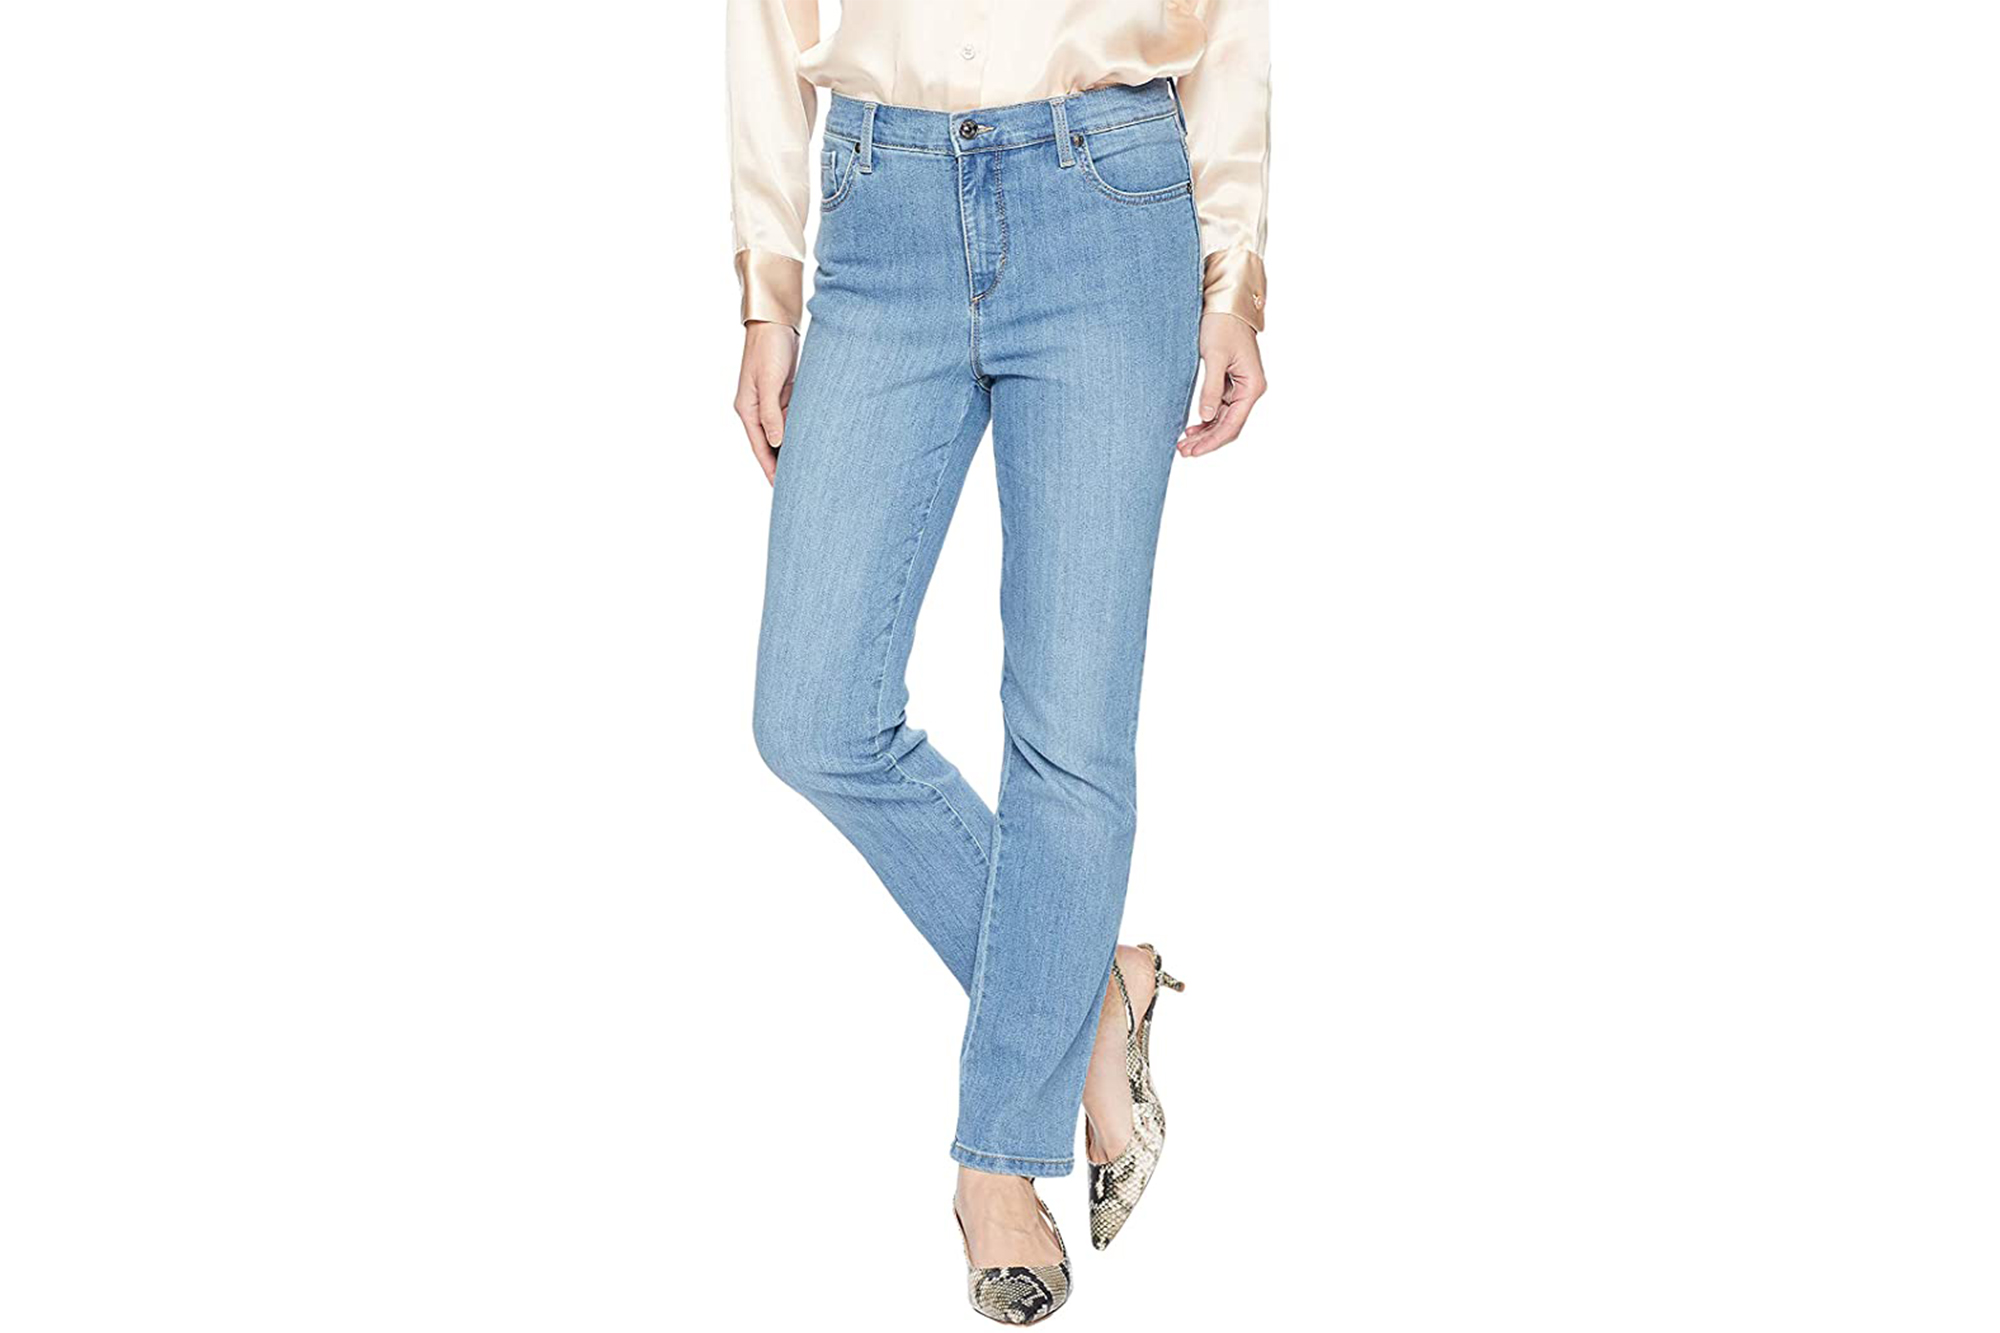 Gloria Vanderbilt Stylish Mom Jeans Have Such a Lovely Fit